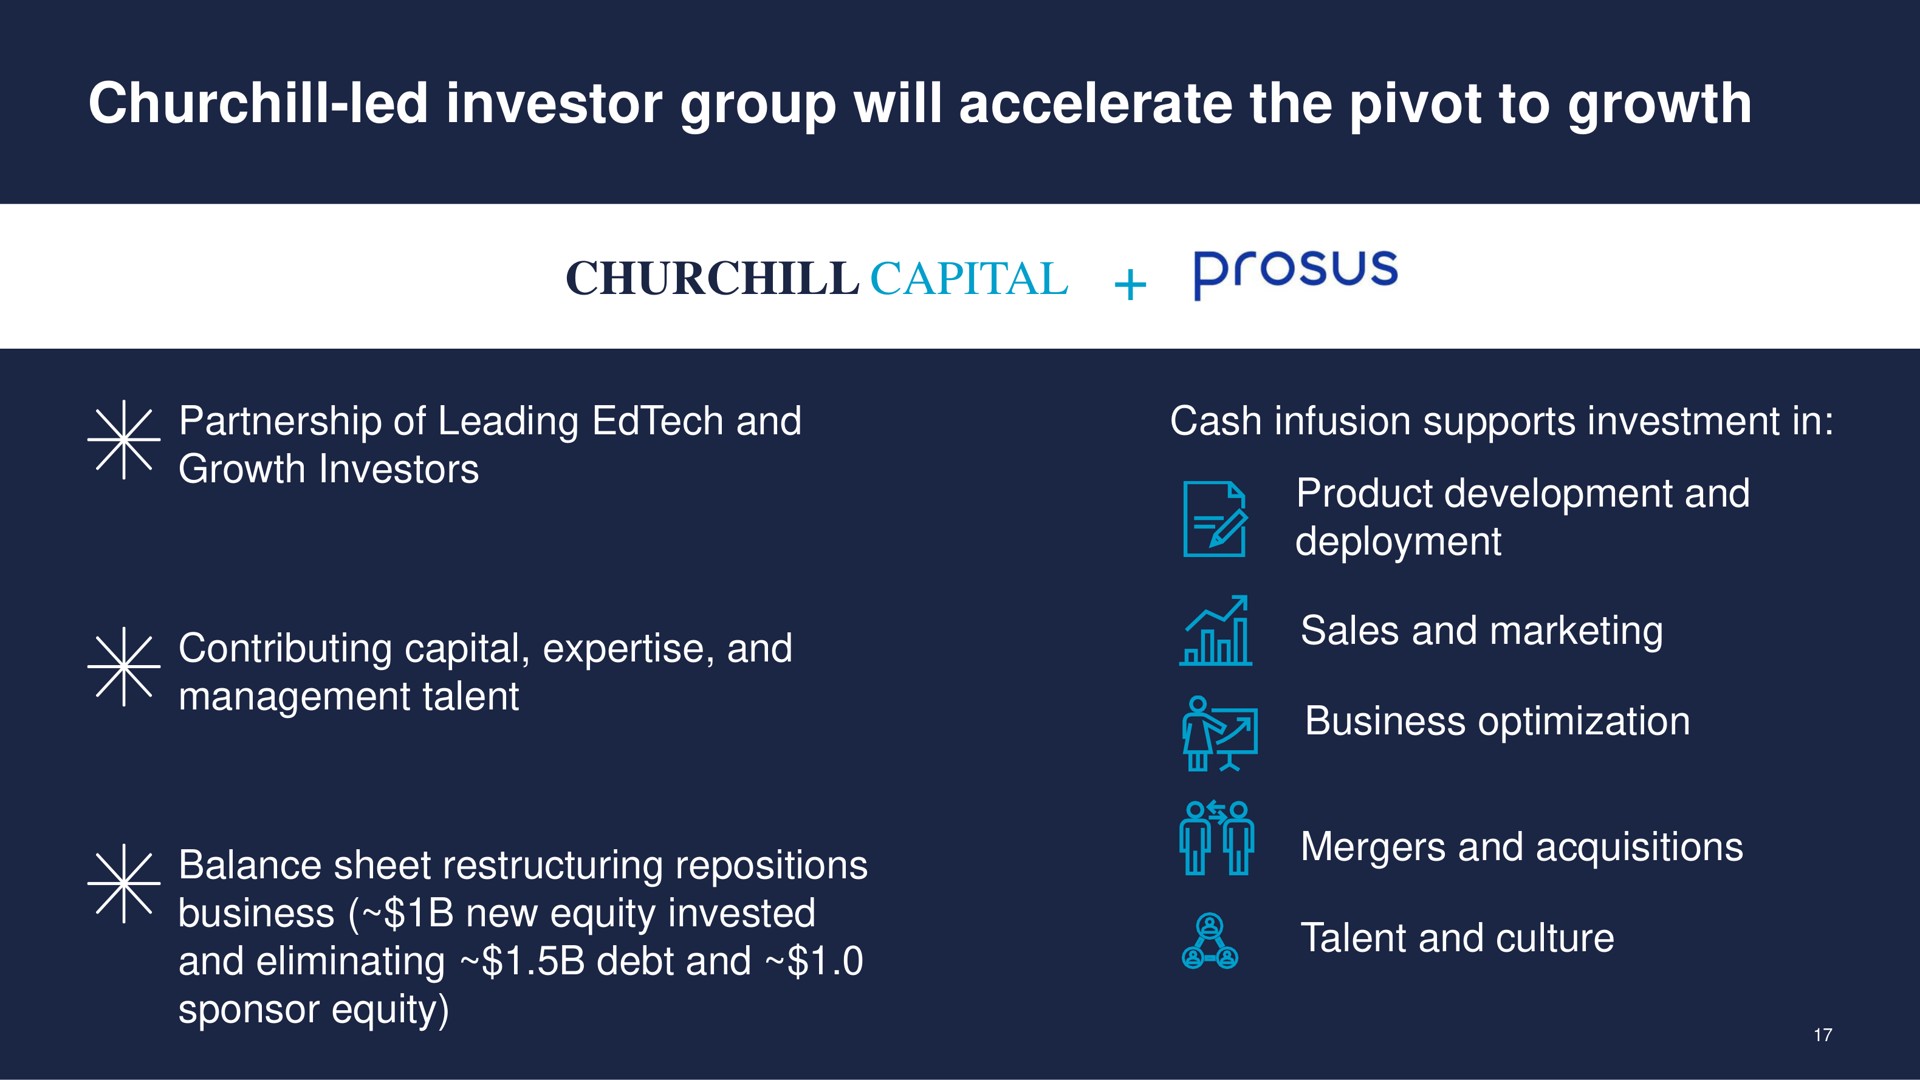 led investor group will accelerate the pivot to growth | Skillsoft